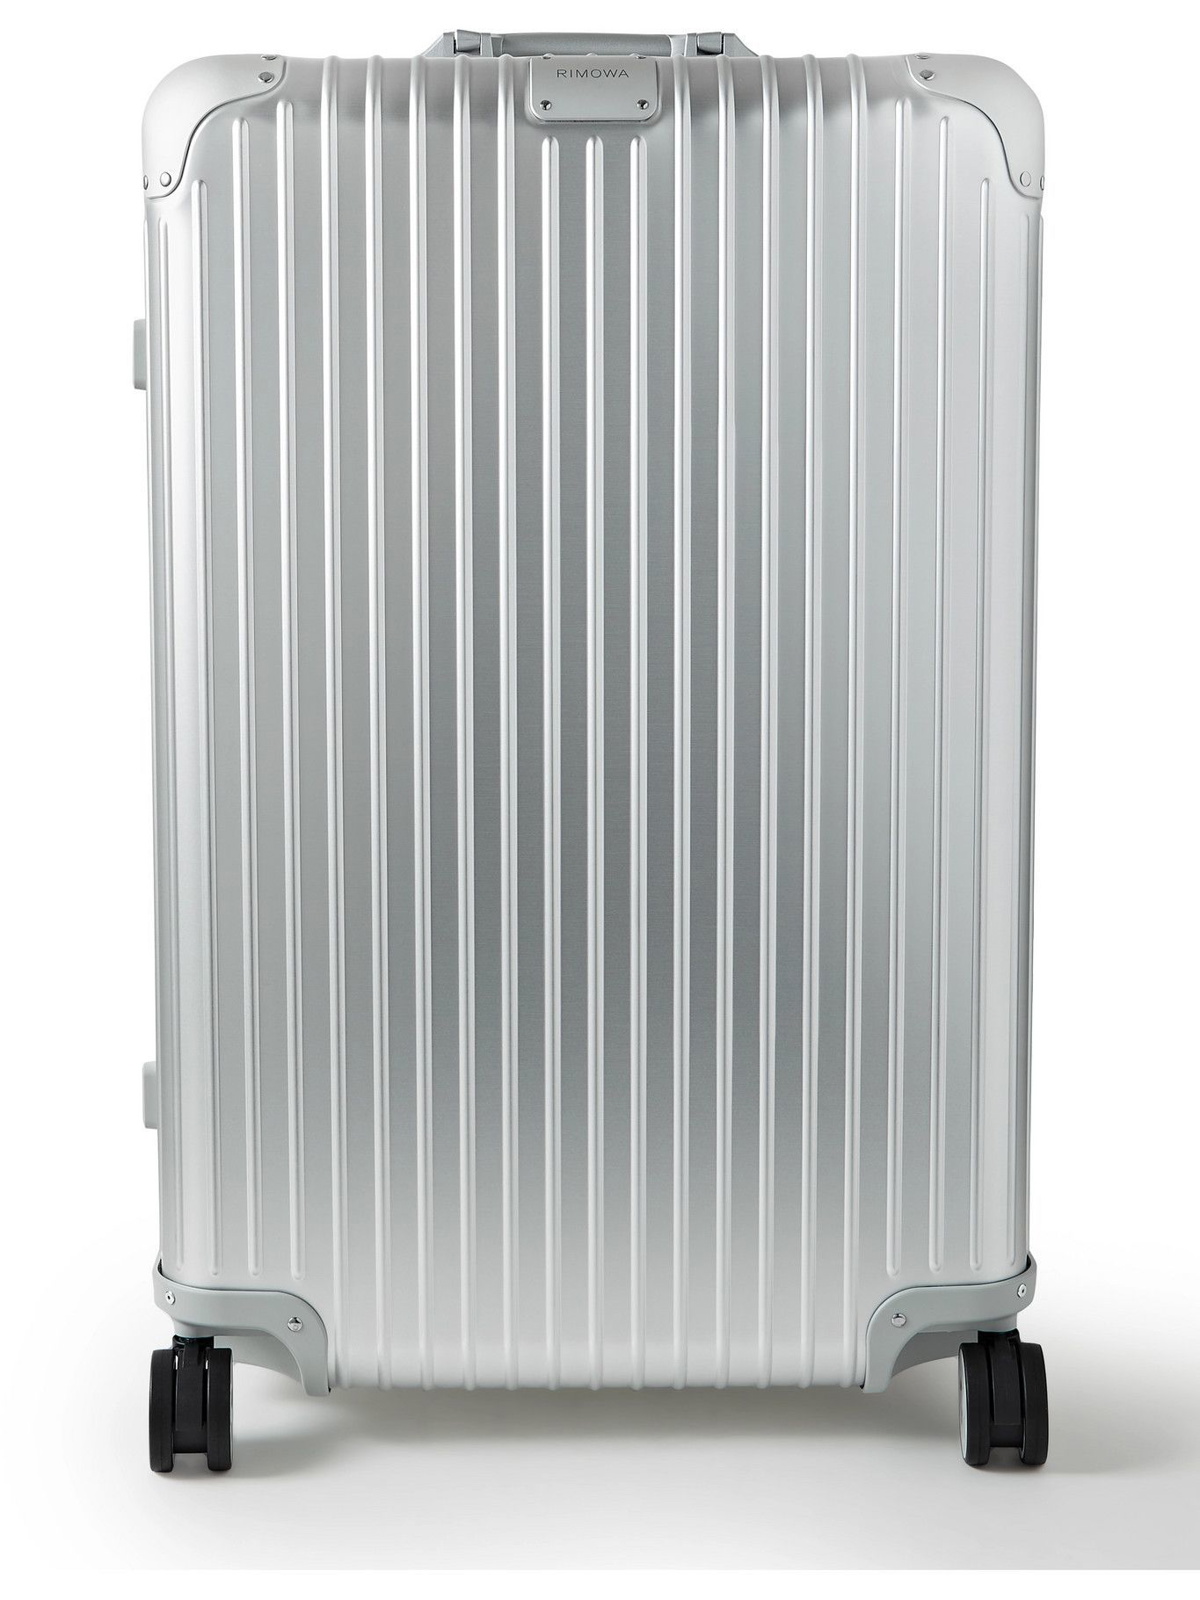 Mr Porter adds German luggage brand Rimowa to collection